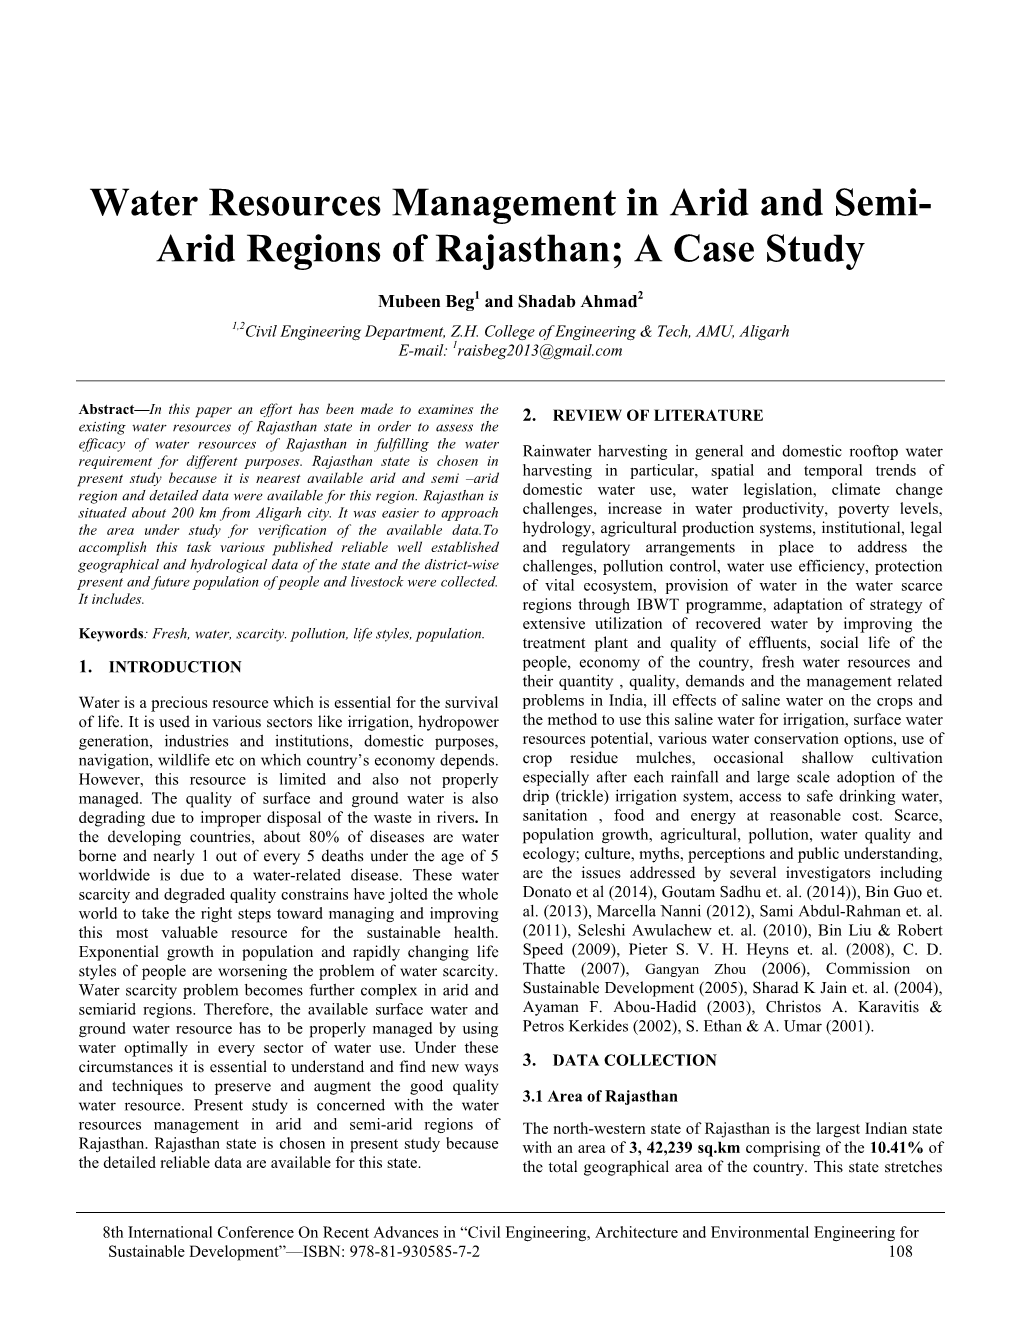 Water Resources Management in Arid and Semi- Arid Regions of Rajasthan; a Case Study